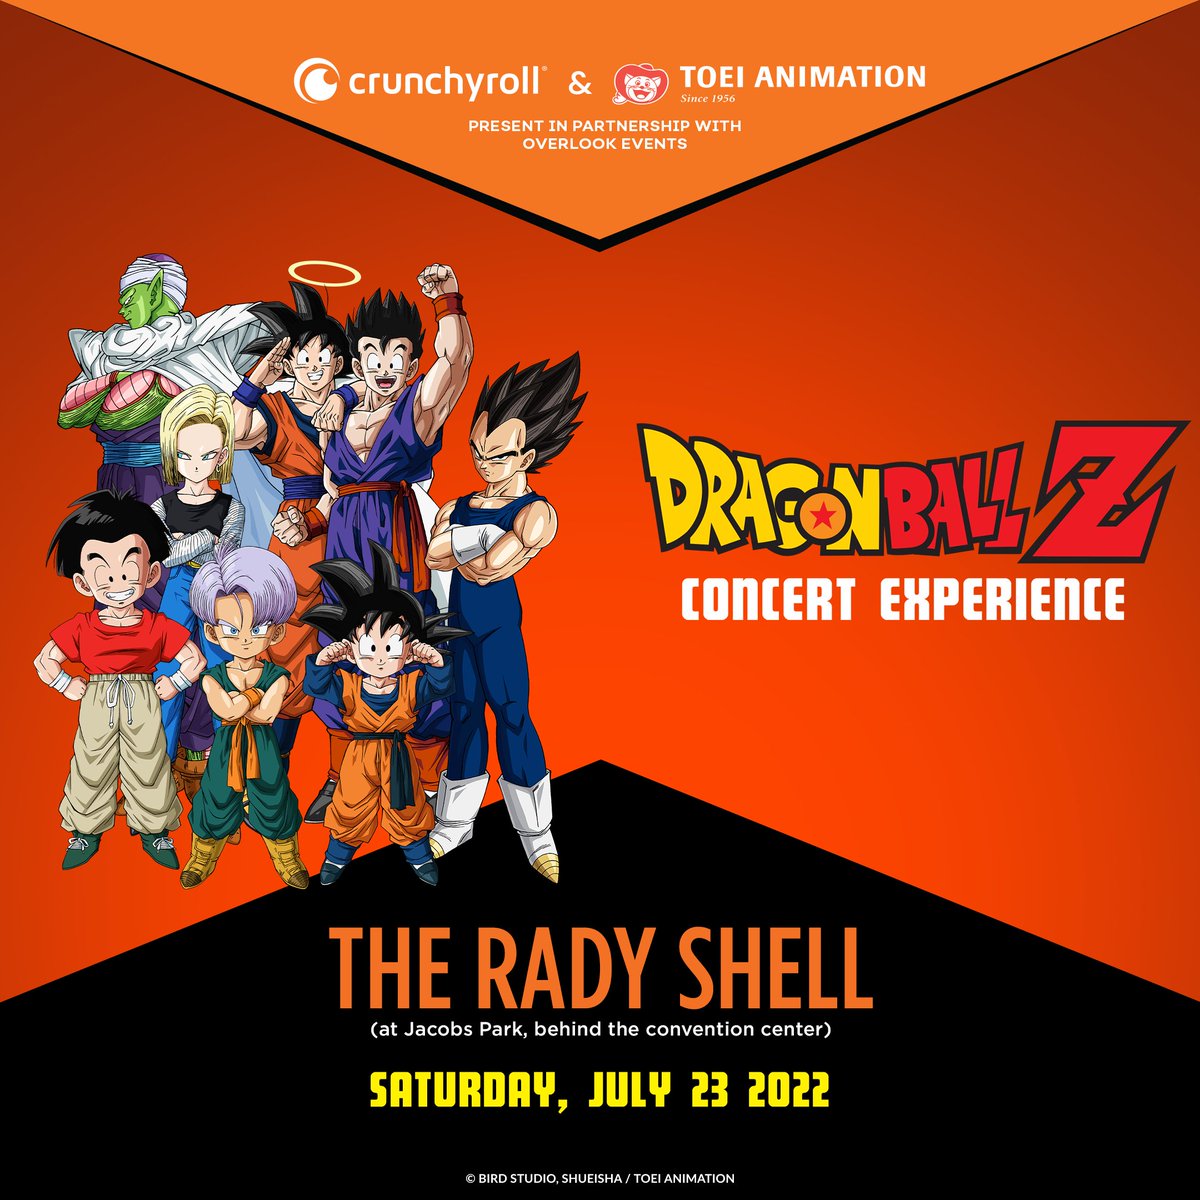 The Dragon Ball Z Concert Experience is just a few days away! It's free for @Comic_Con badge holders, so don't miss out! 🤜💥 MORE: got.cr/SDCCconcert-tw